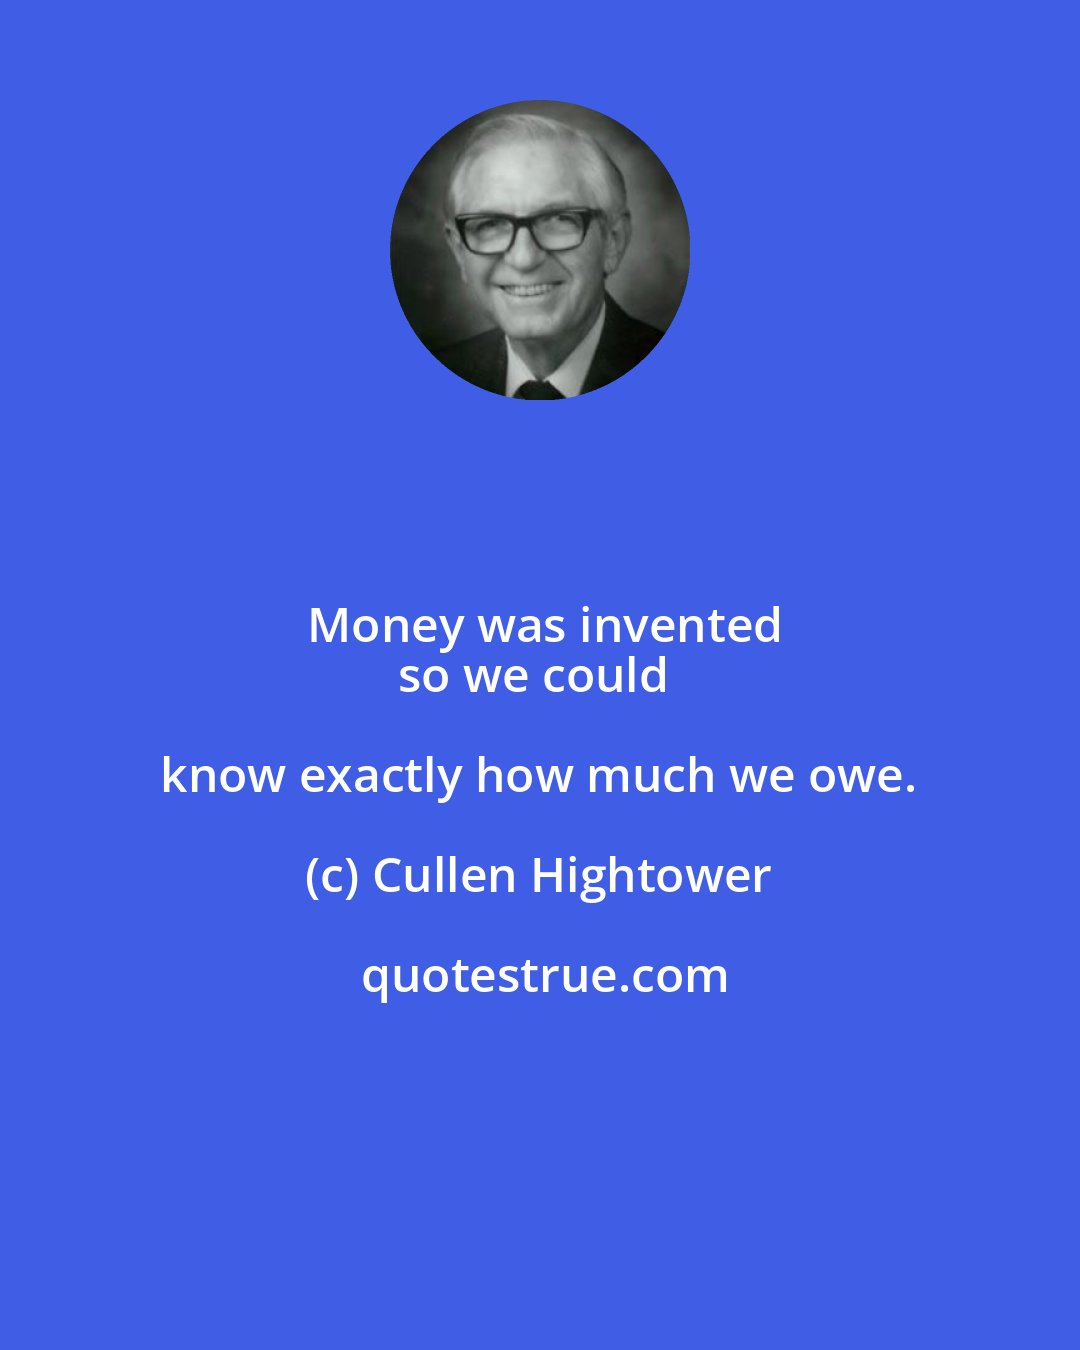 Cullen Hightower: Money was invented
so we could know exactly how much we owe.